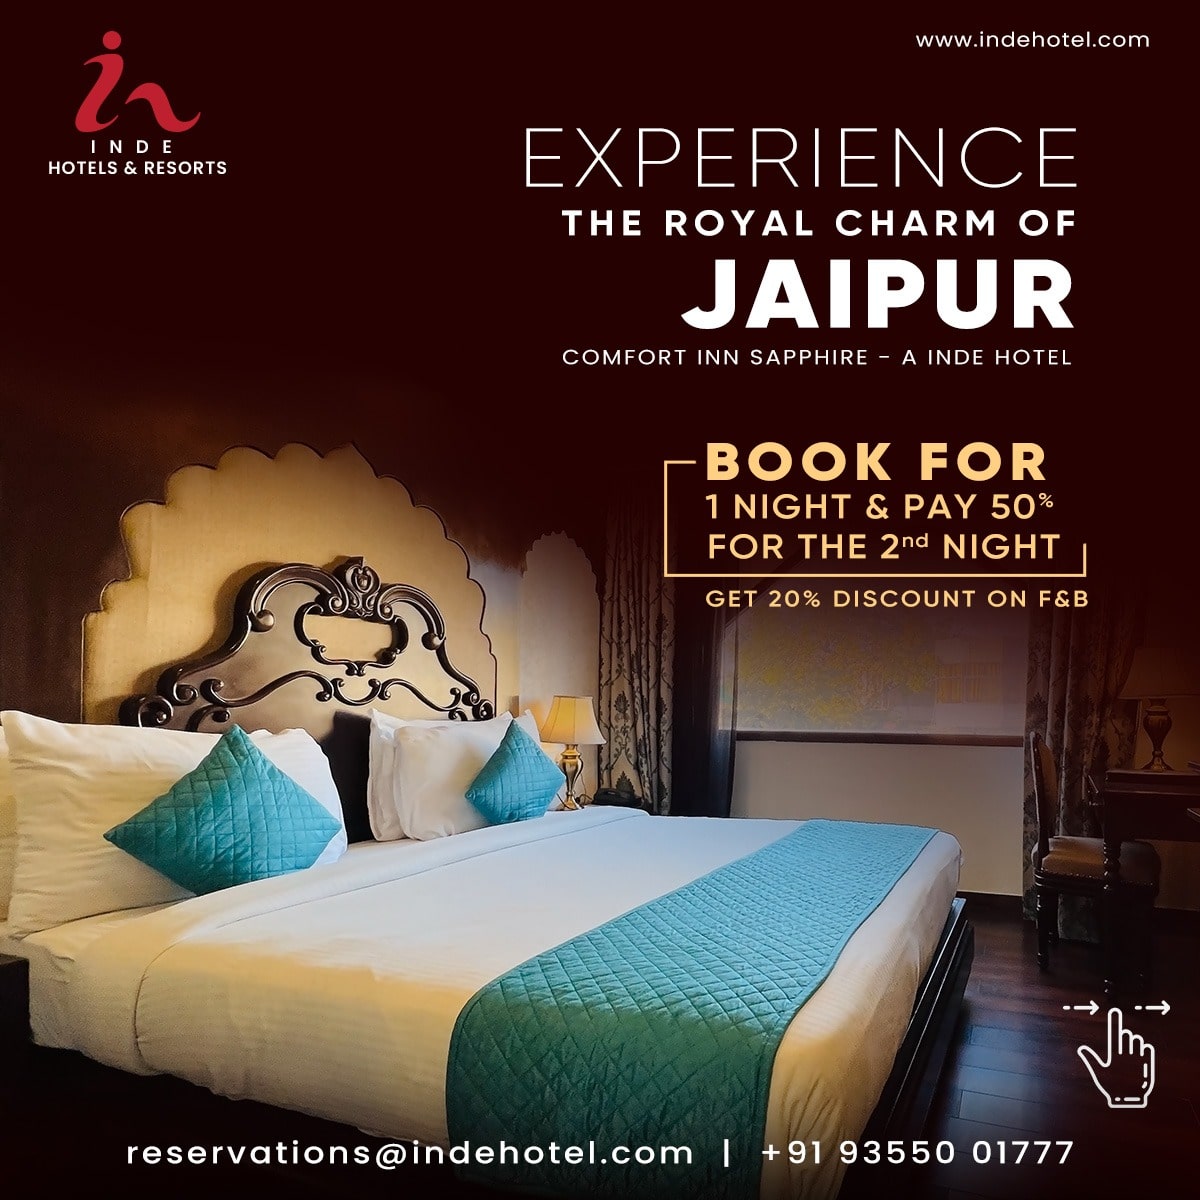 Inde Hotels & Resorts - Offers